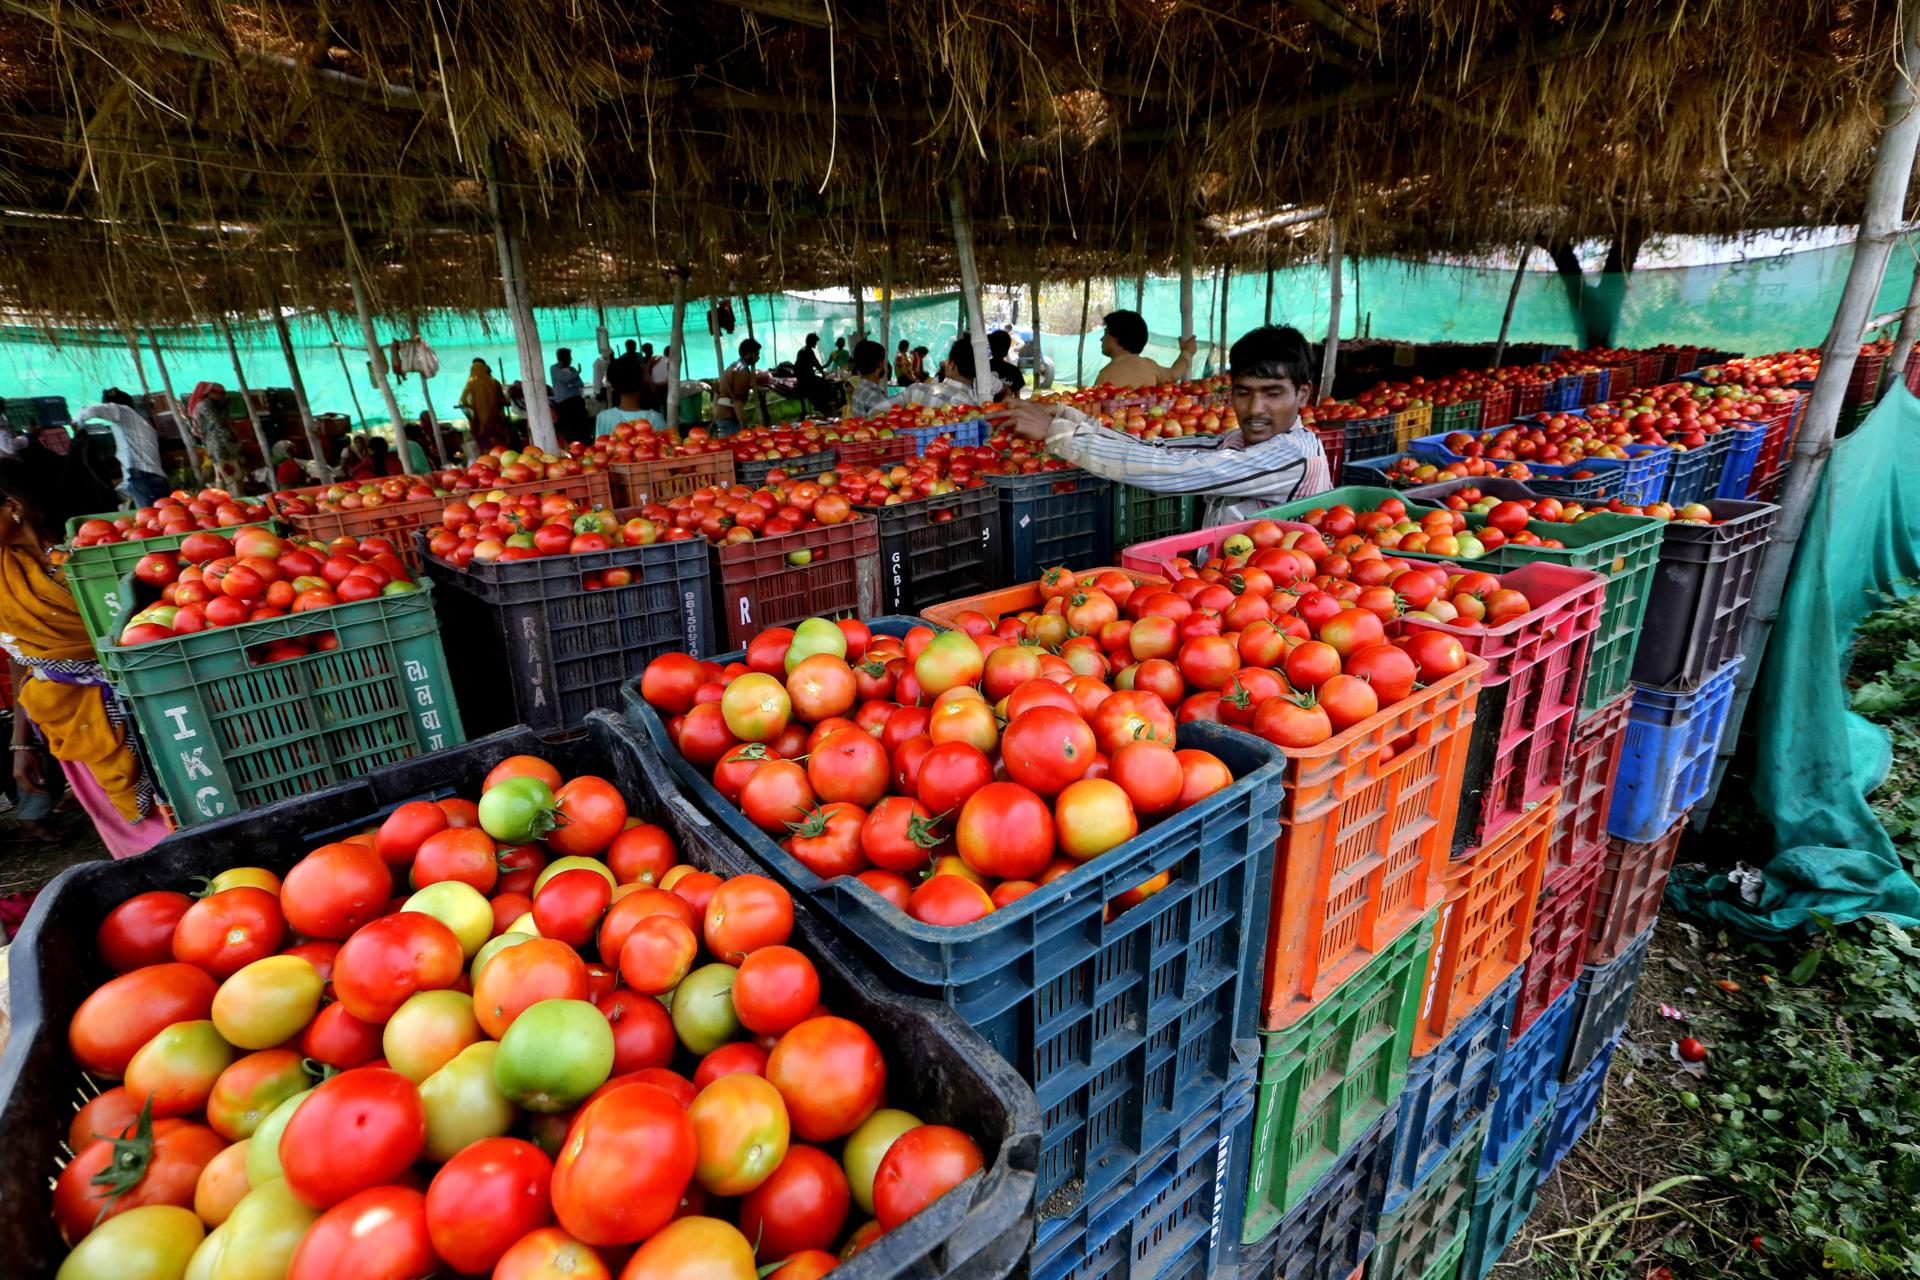 A file picture showing an tomatoes near a farm, at Aamon village in Seahore district, about 125km from Bhopal, India. EPA/EFE/FILE/SANJEEV GUPTA